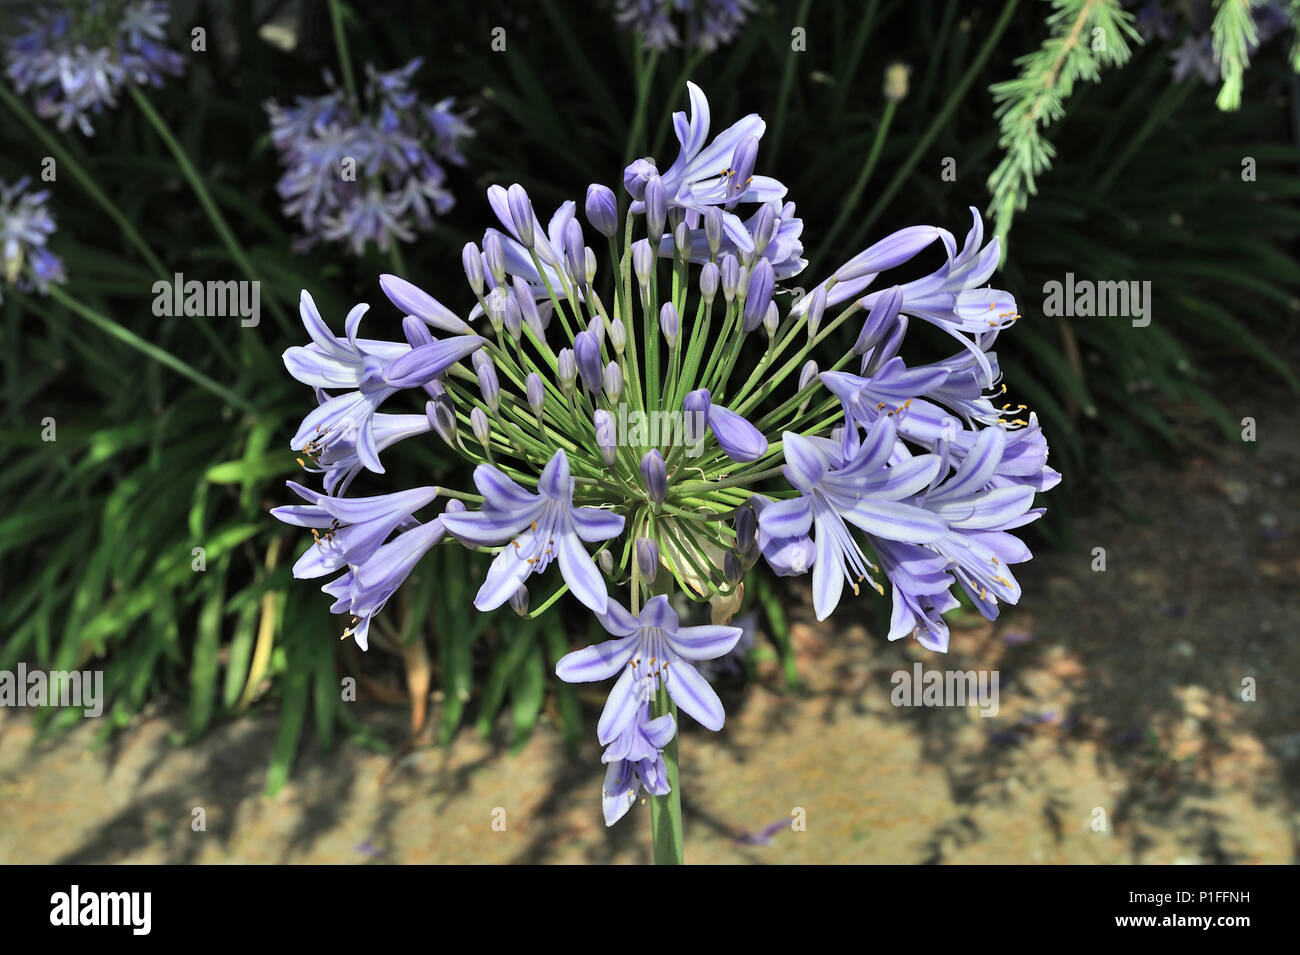 Agapanthus africanus, African Lily, Lily of the Nile, Laguna Hills, CA 30478 080521 Banque D'Images